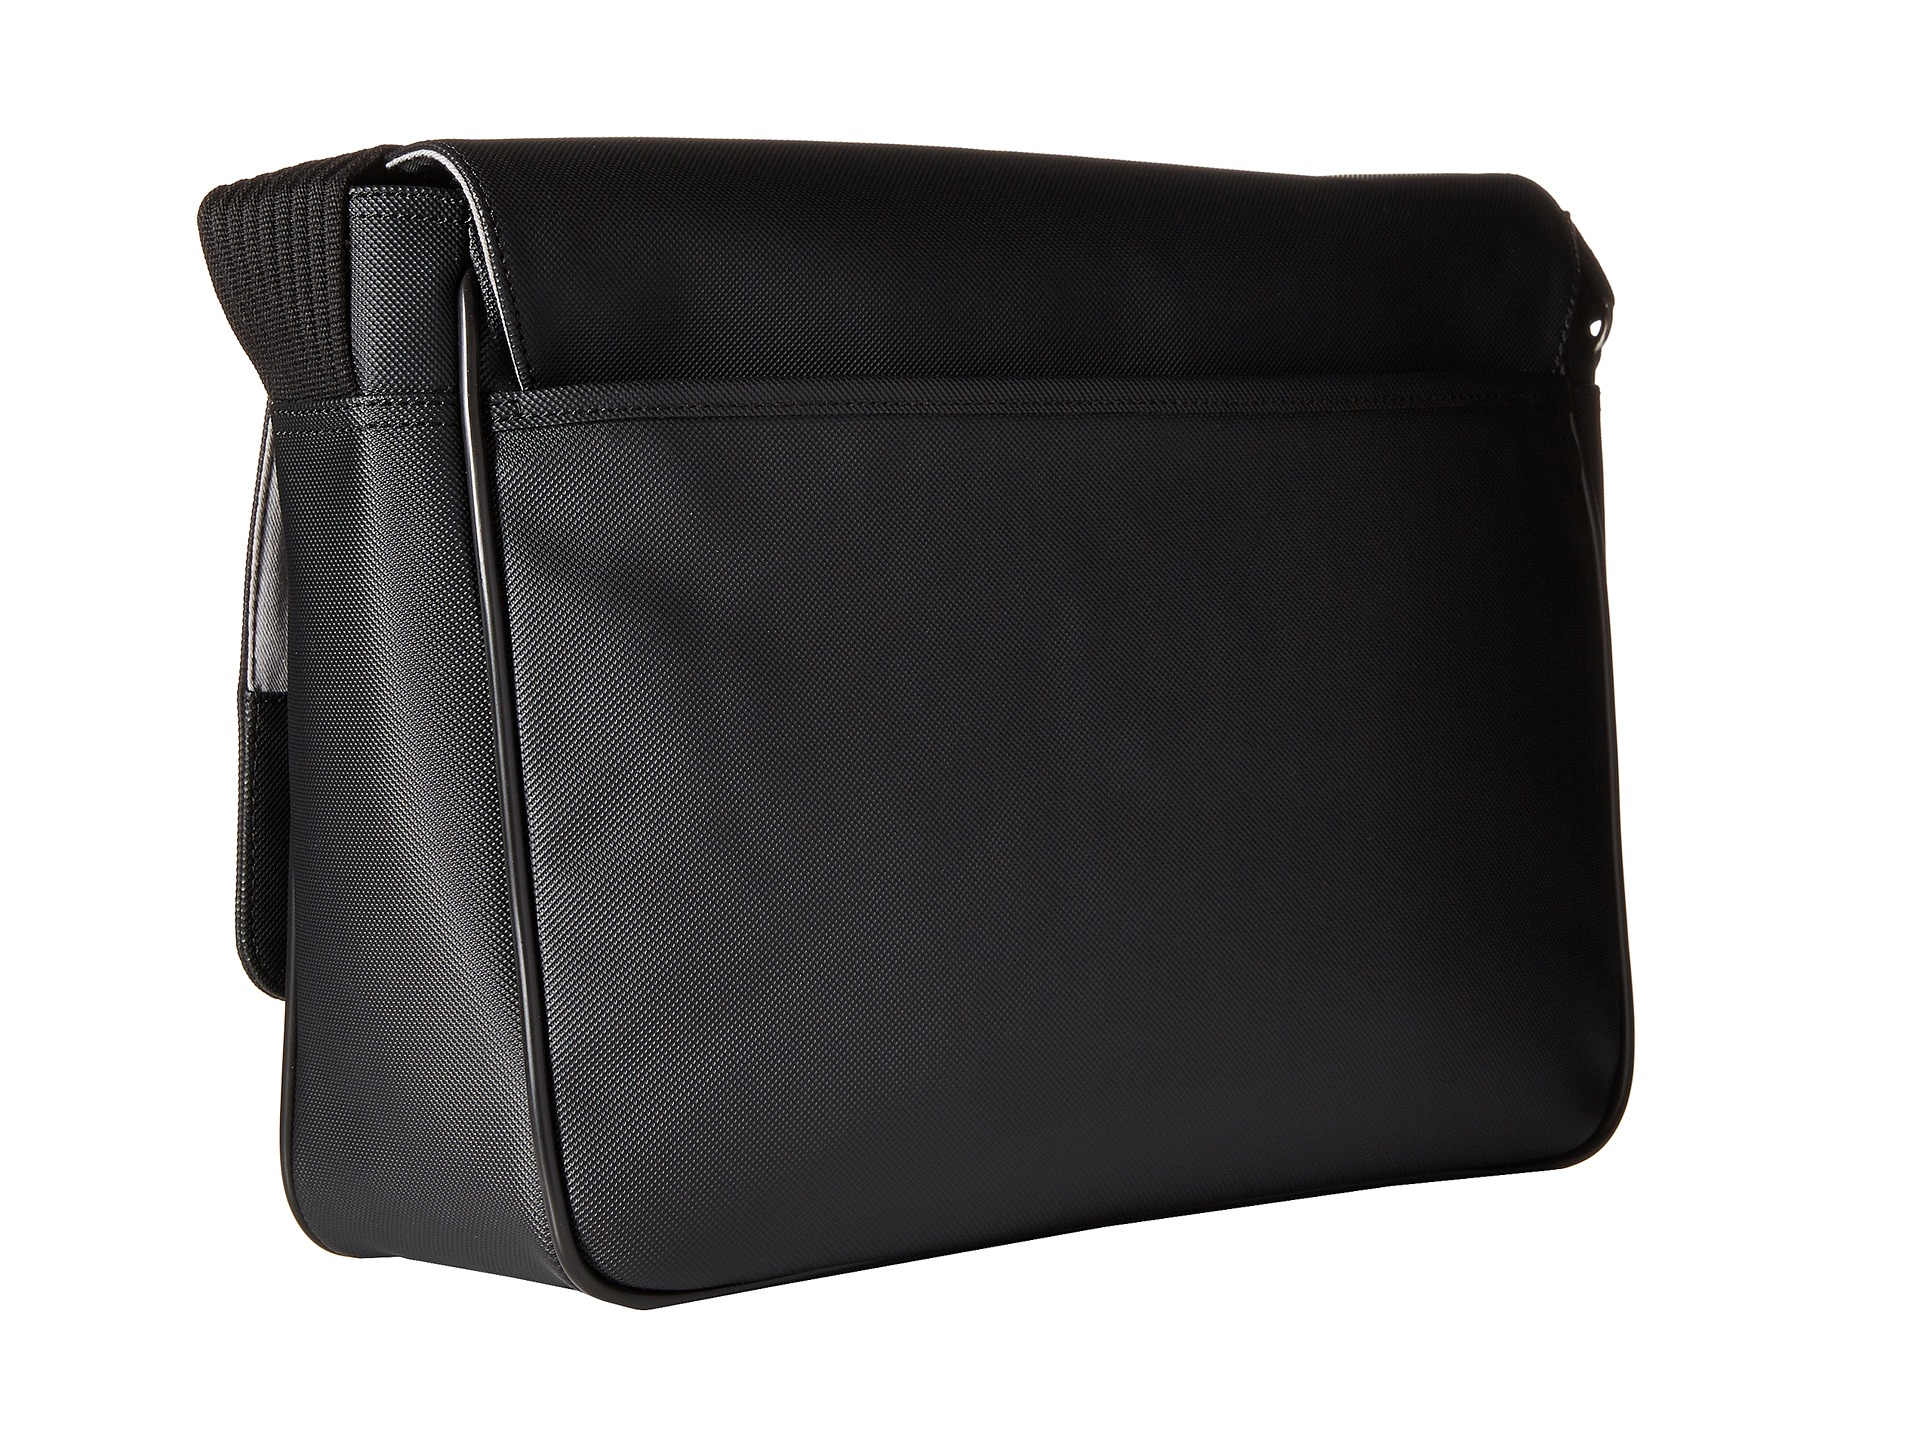 Lacoste Synthetic Classic Messenger Bag in Black for Men - Lyst